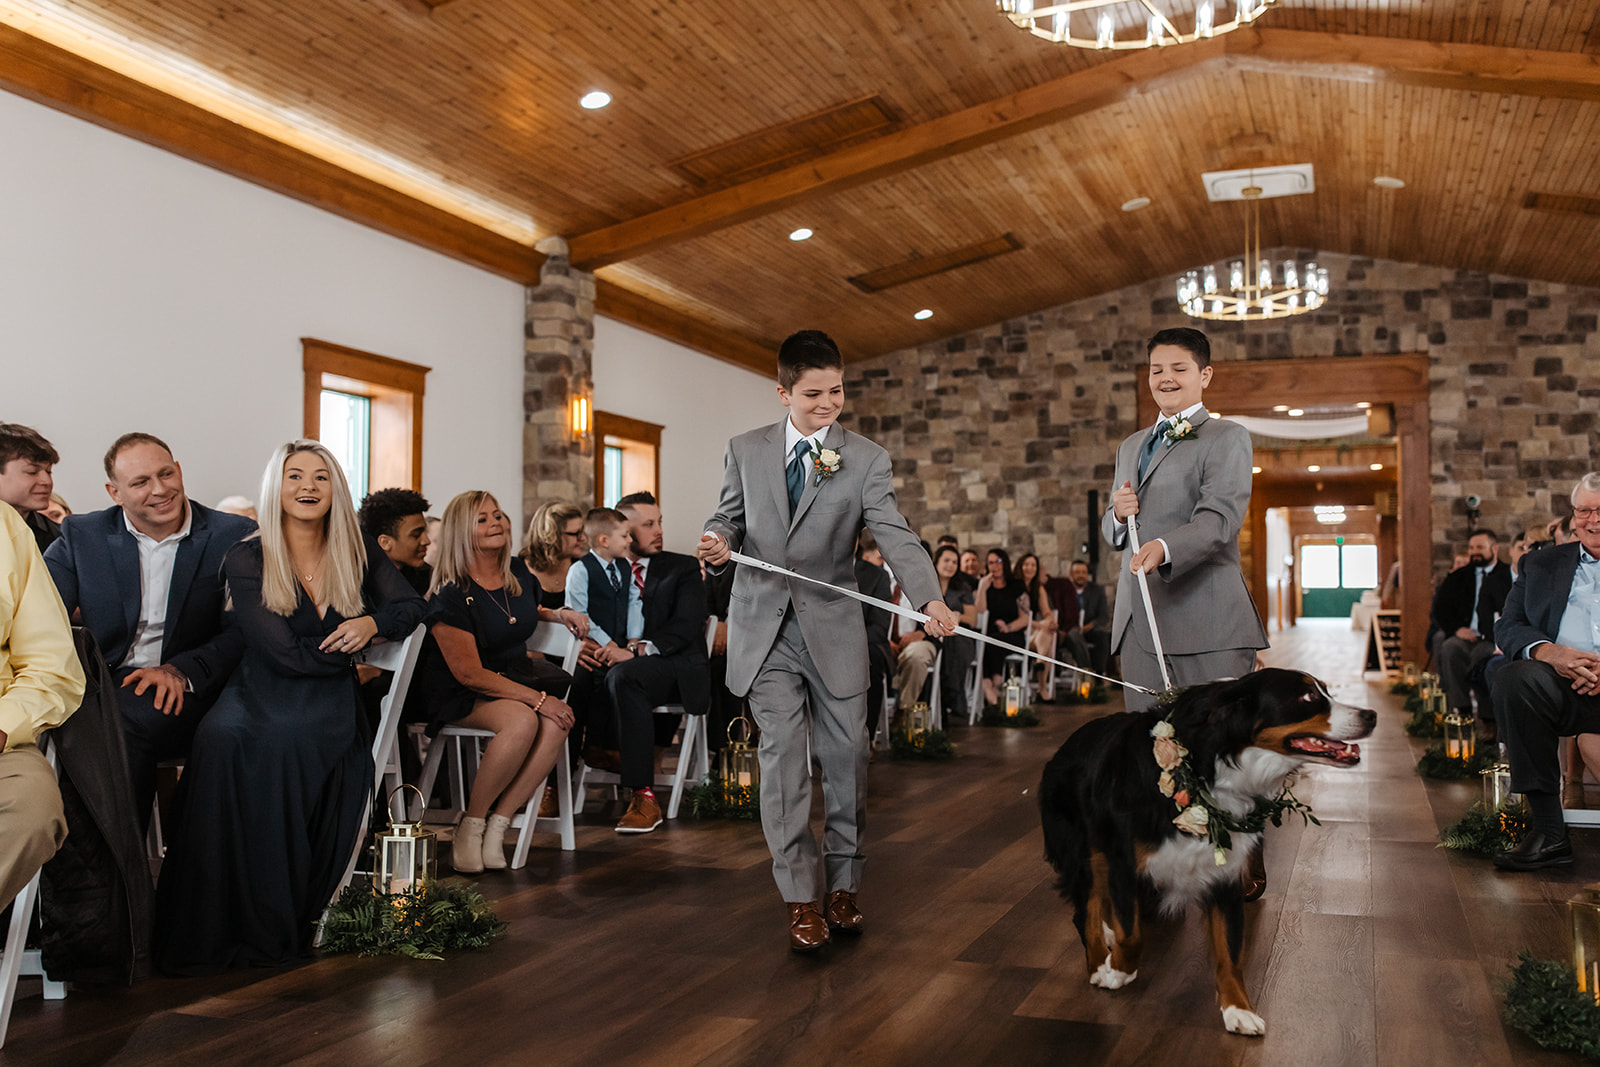 the dog walking down the aisle with the dog